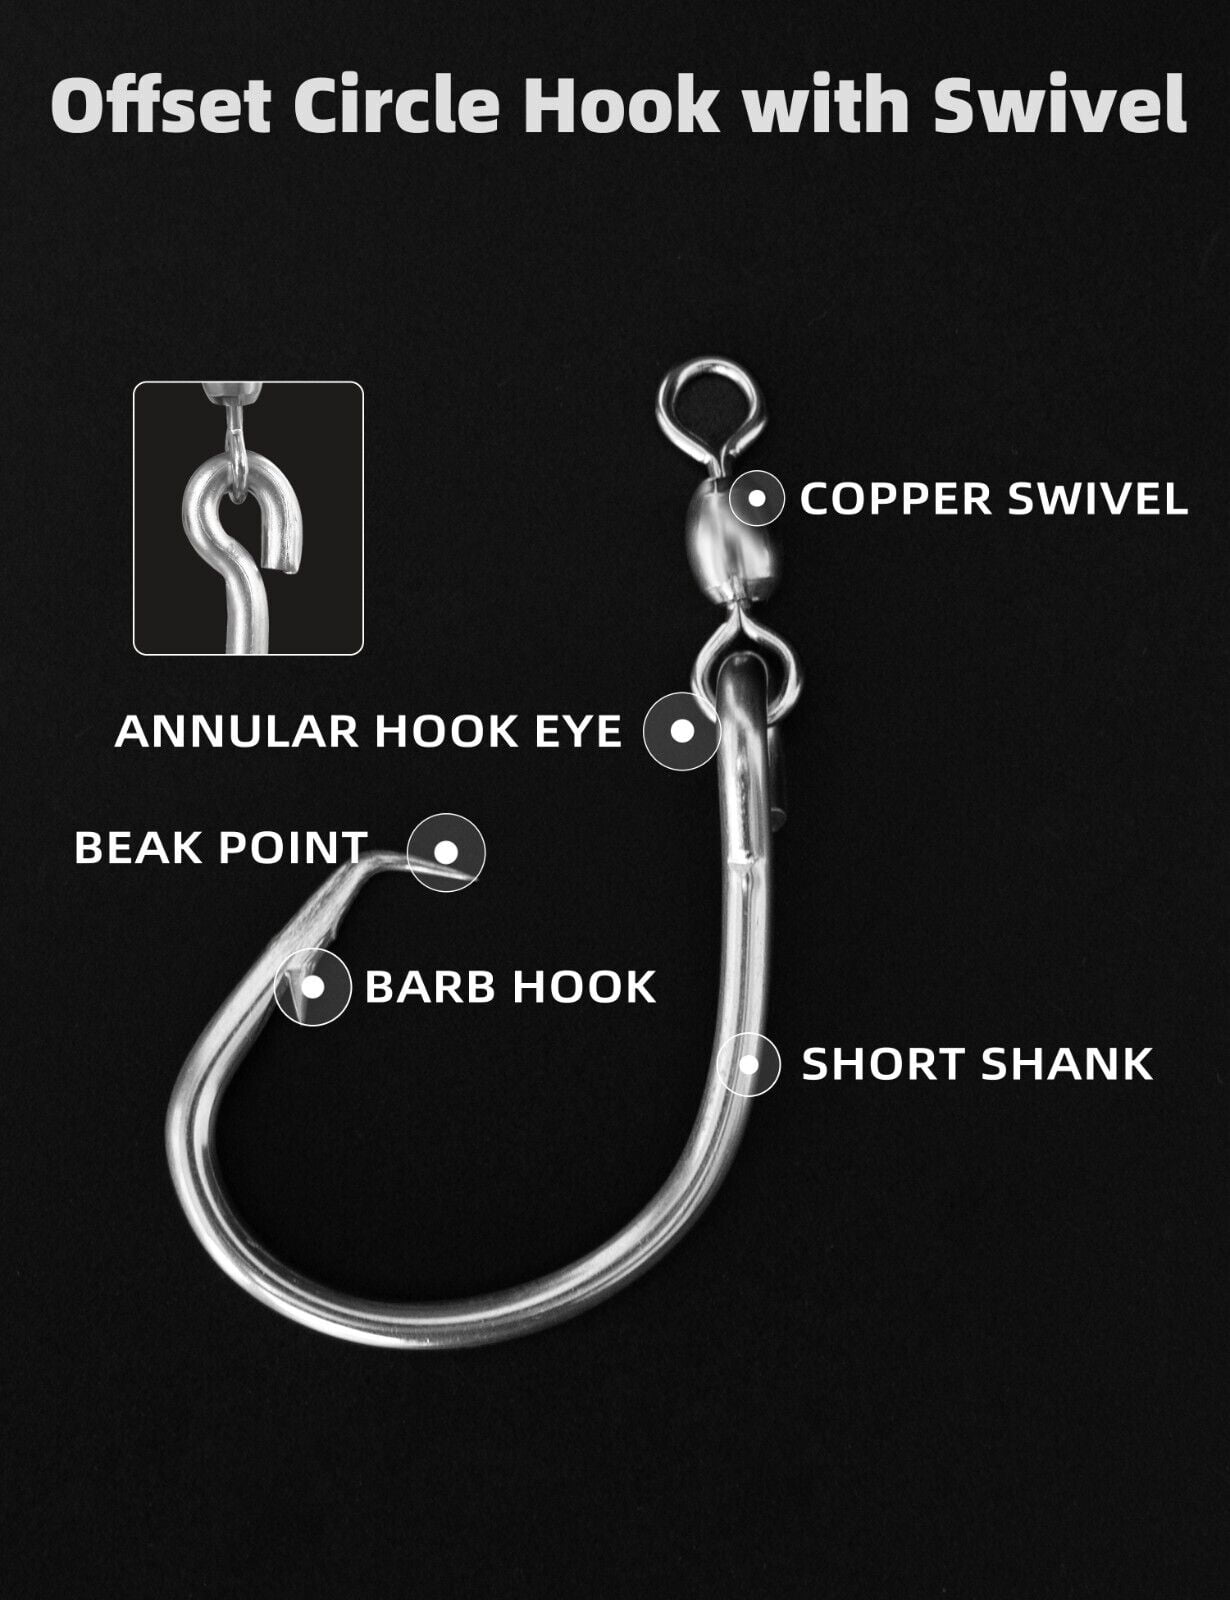 BLUEWING Offset Circle Hook with Swivel 5pcs Stainless Steel Fishing Hooks  Extra Sharp Fish Hooks for Freshwater Saltwater Fishing, Size 16/0 